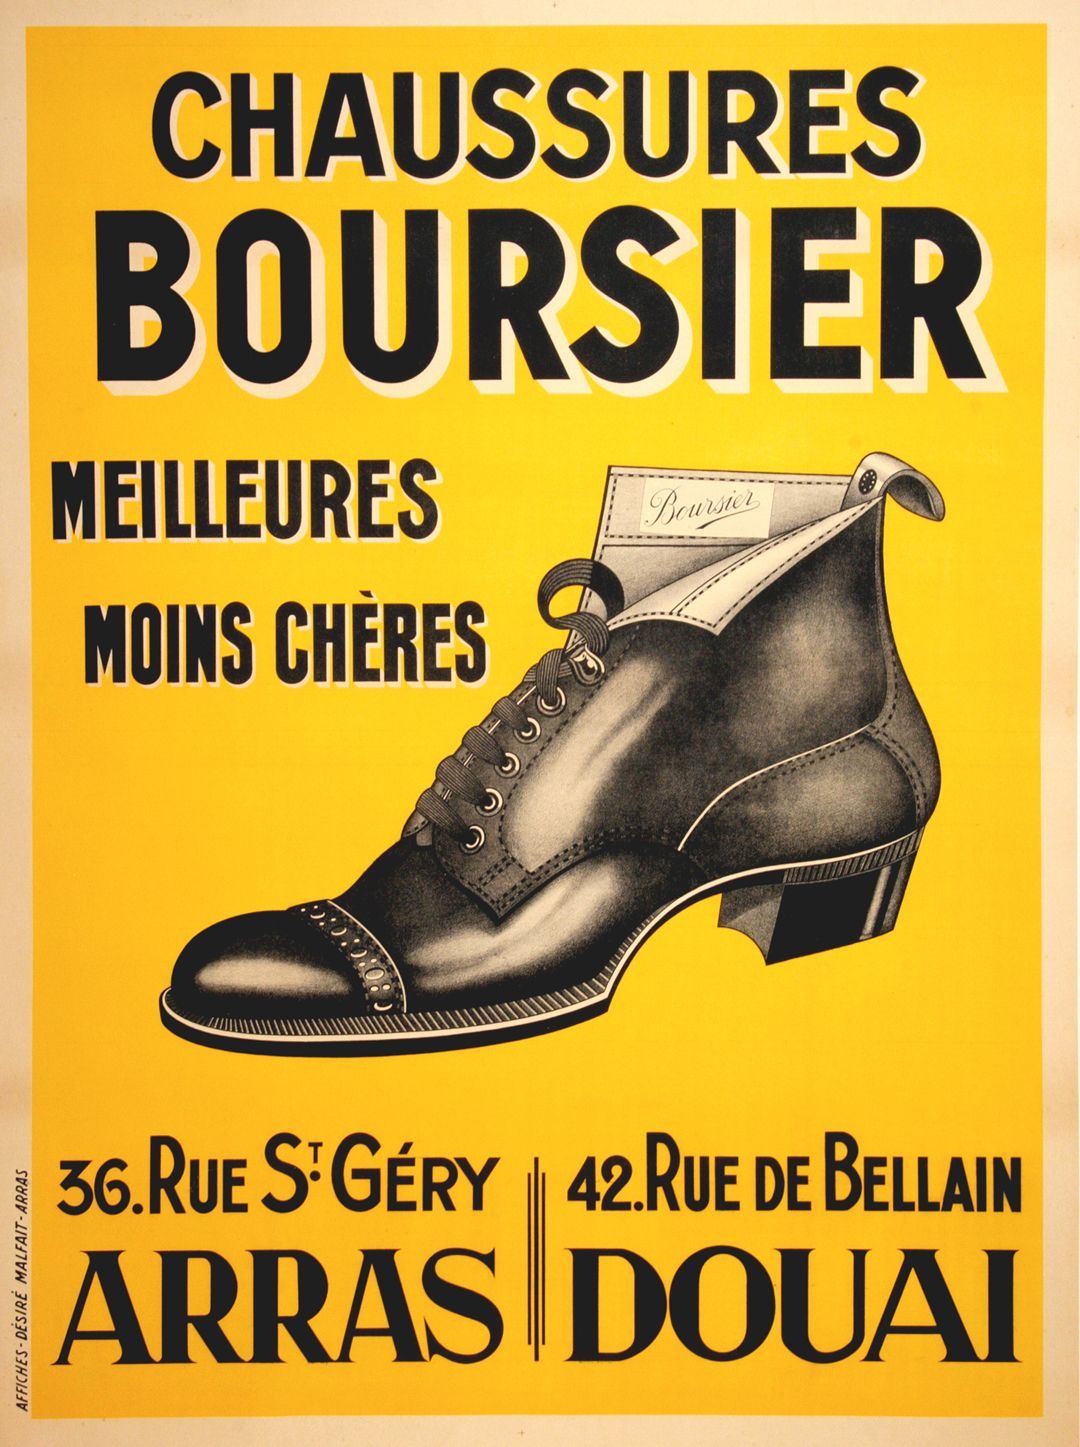 Original Vintage 1920's French Shoe Poster - Boursier Chaussures